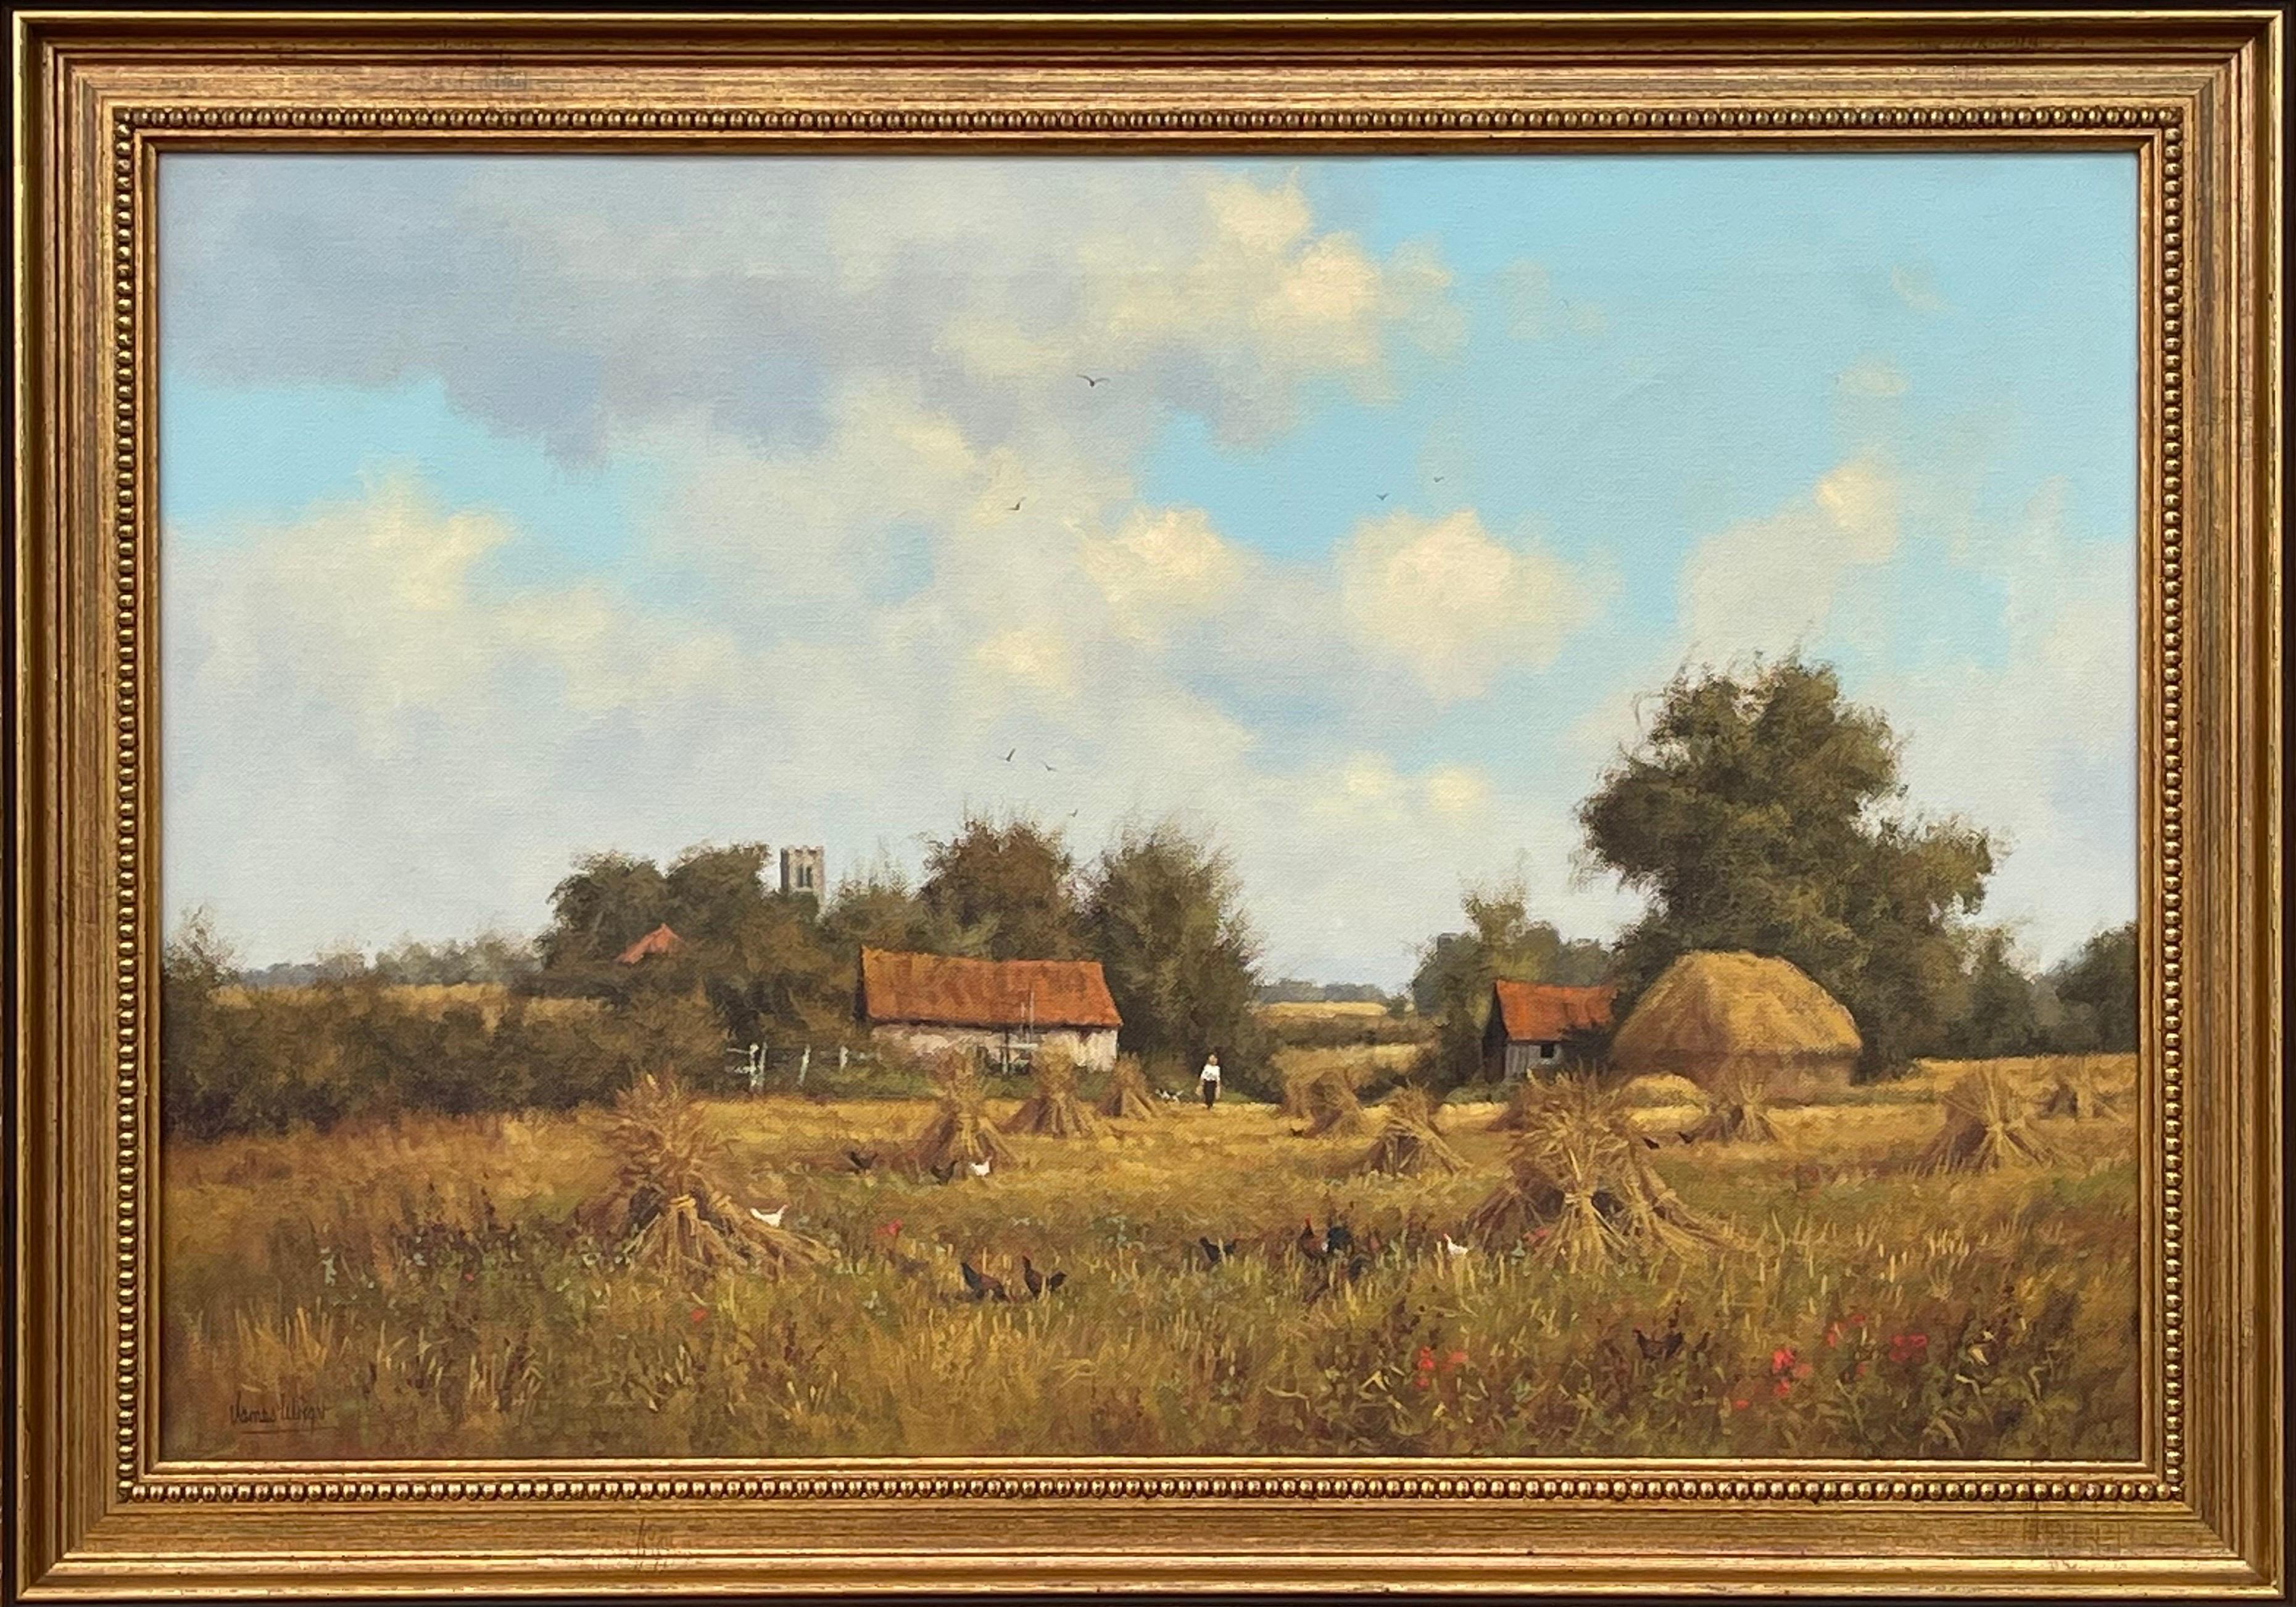 James Wright Landscape Painting - Farm Scene with Haystacks in the English Countryside by Realist Landscape Artist